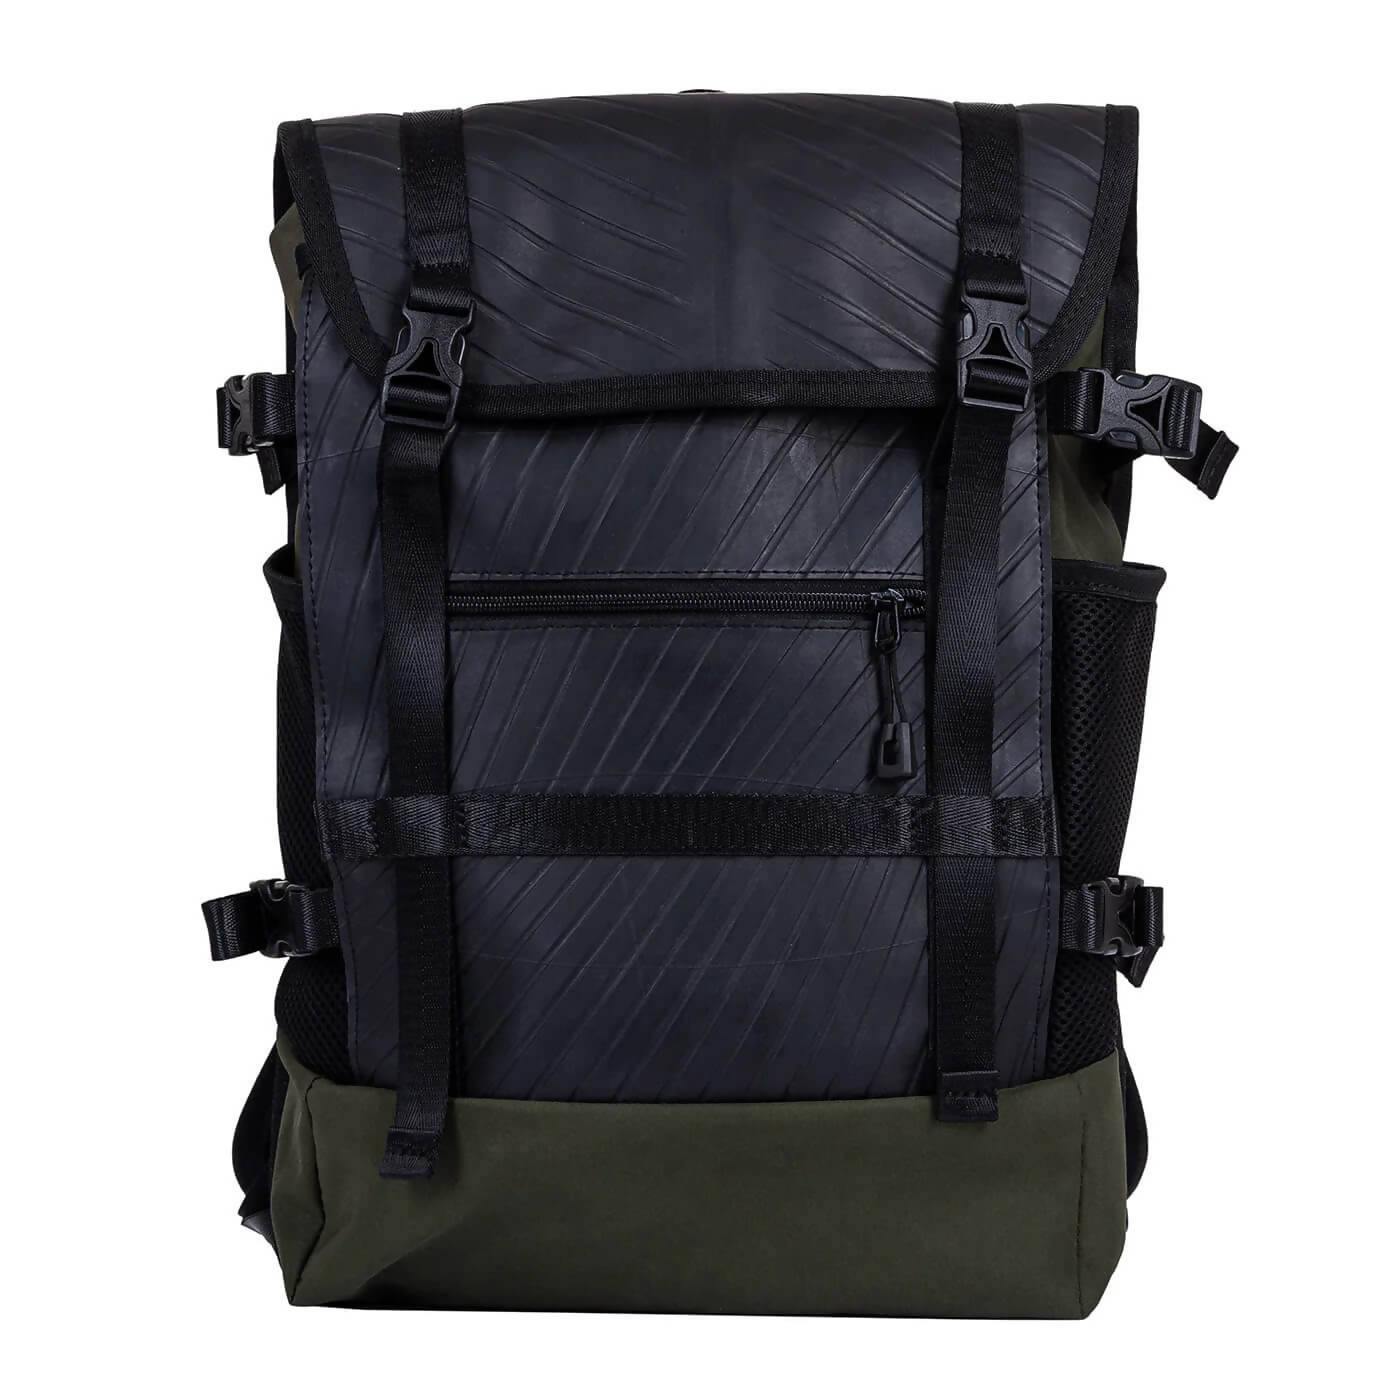 Colonel Vegan Waterproof Backpack with Laptop Compartment